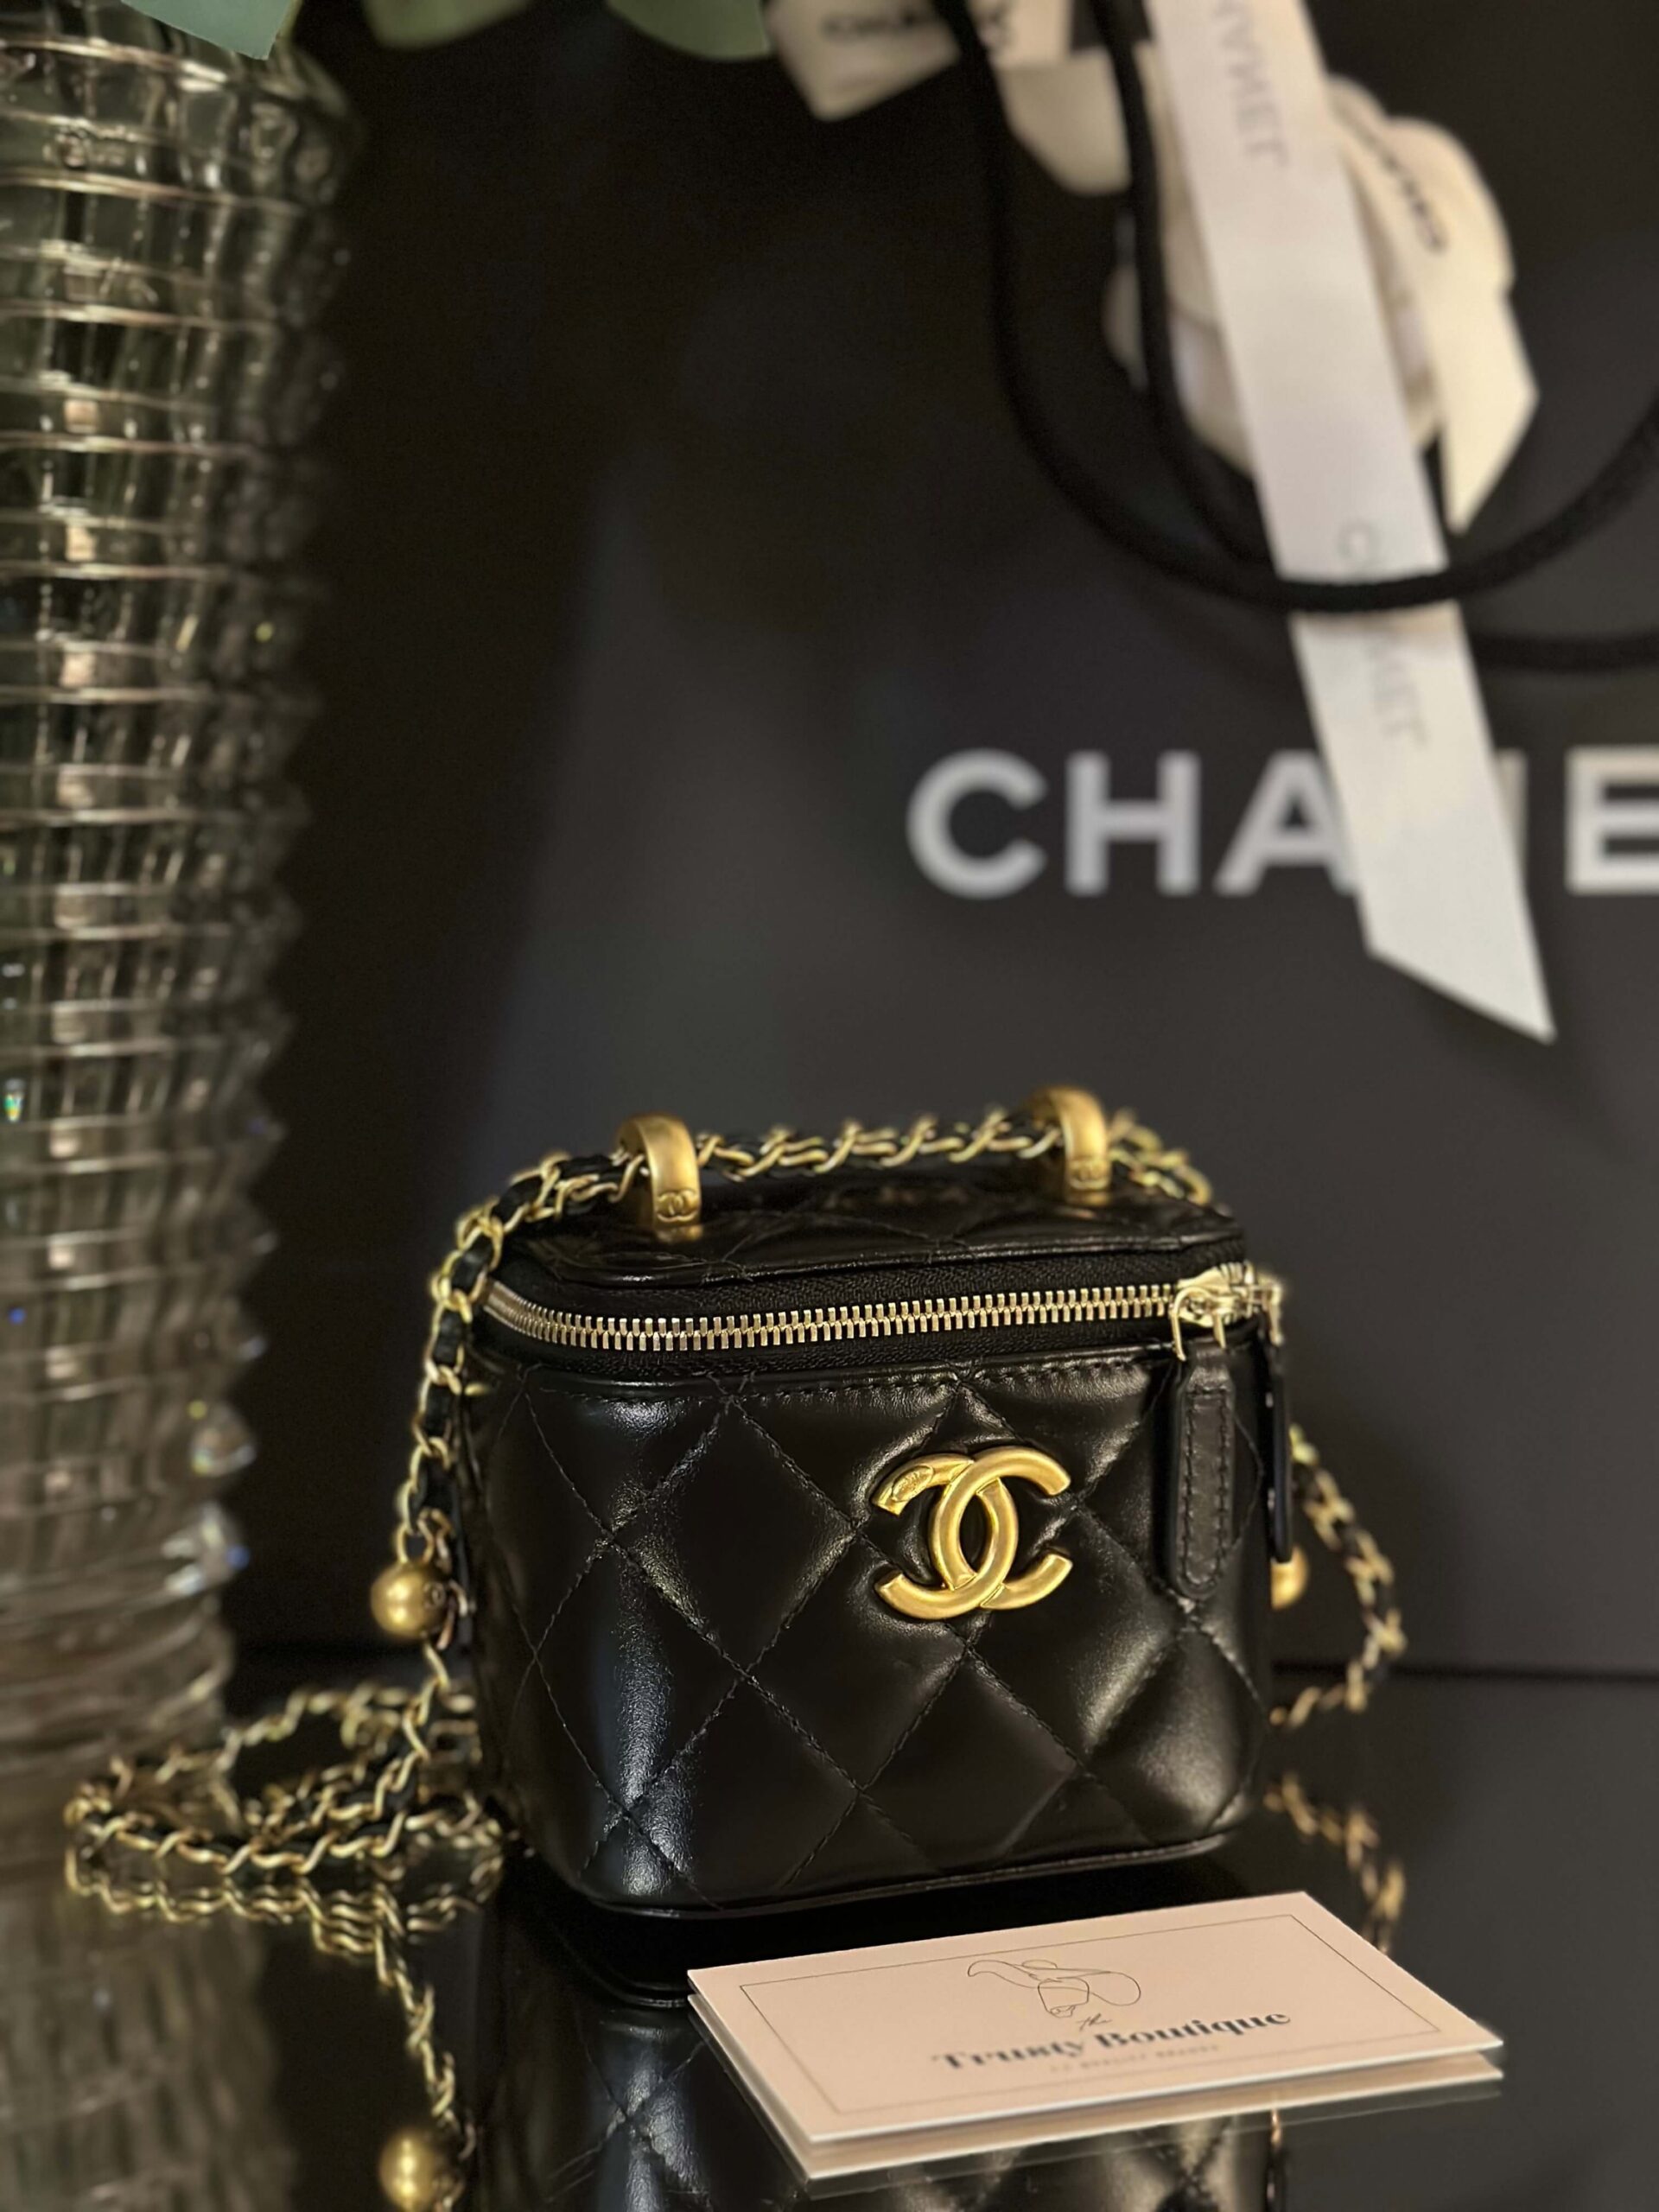 Chanel Archives - Page 6 of 10 - Luxury consignment shop online